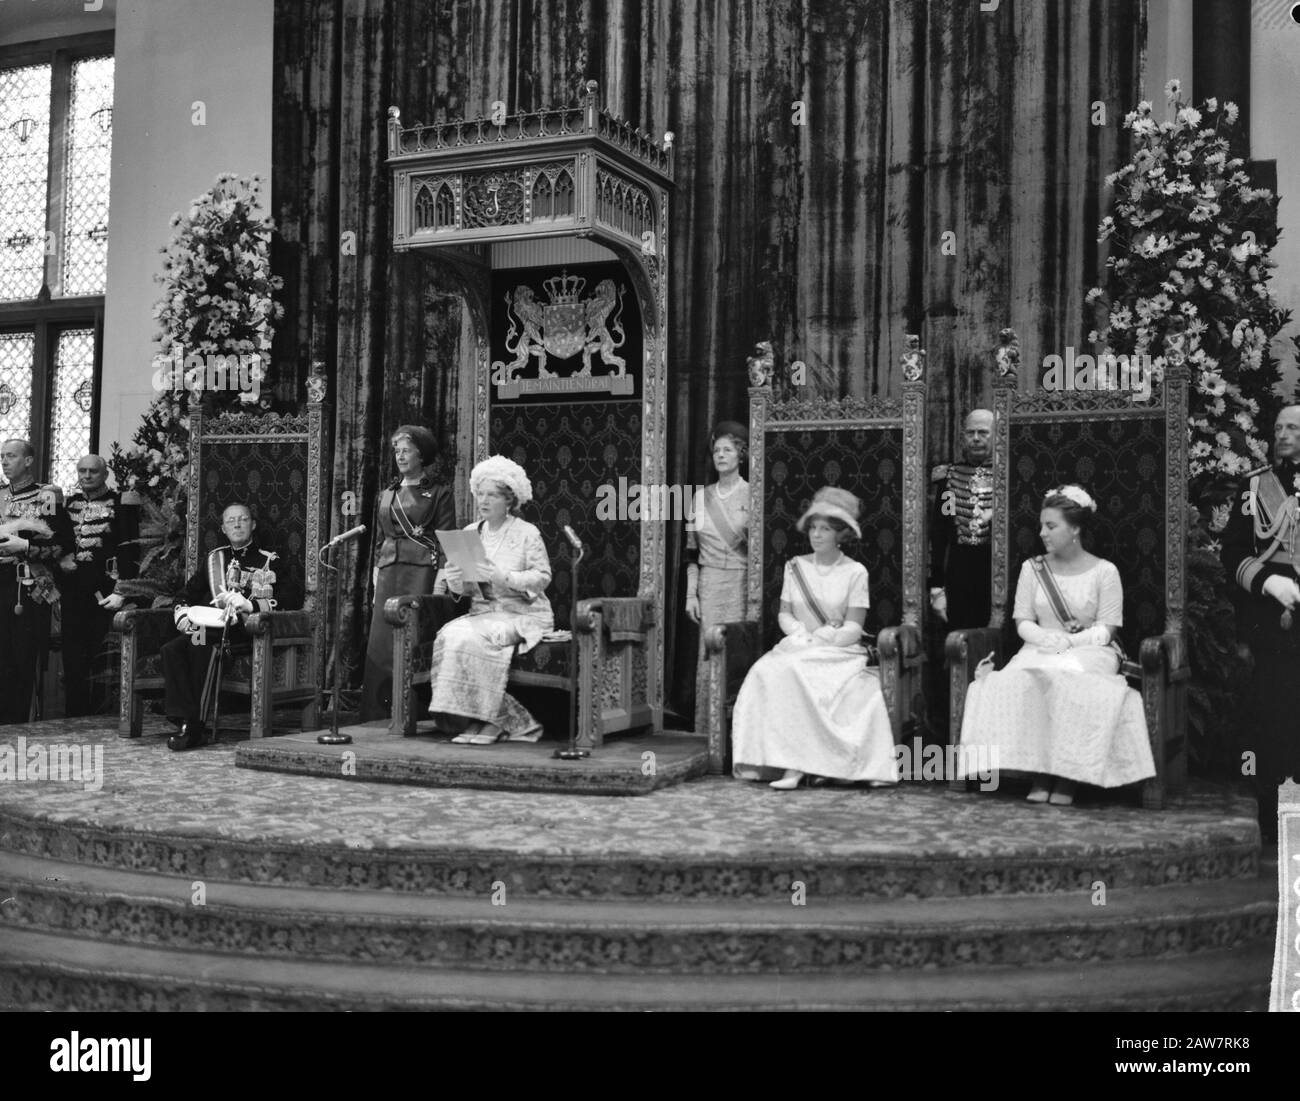 Opening of the States General, Queen Juliana speaks the Queen's speech from left Prince Bernhard, right, Princess Beatrix, Margriet Date: September 15, 1964 Location: The Hague, Zuid-Holland Keywords: Openings, THRONE REDES, queens Person Name: Beatrix, princess, Bernhard, prince, Juliana (queen Netherlands), Margriet, princess Stock Photo